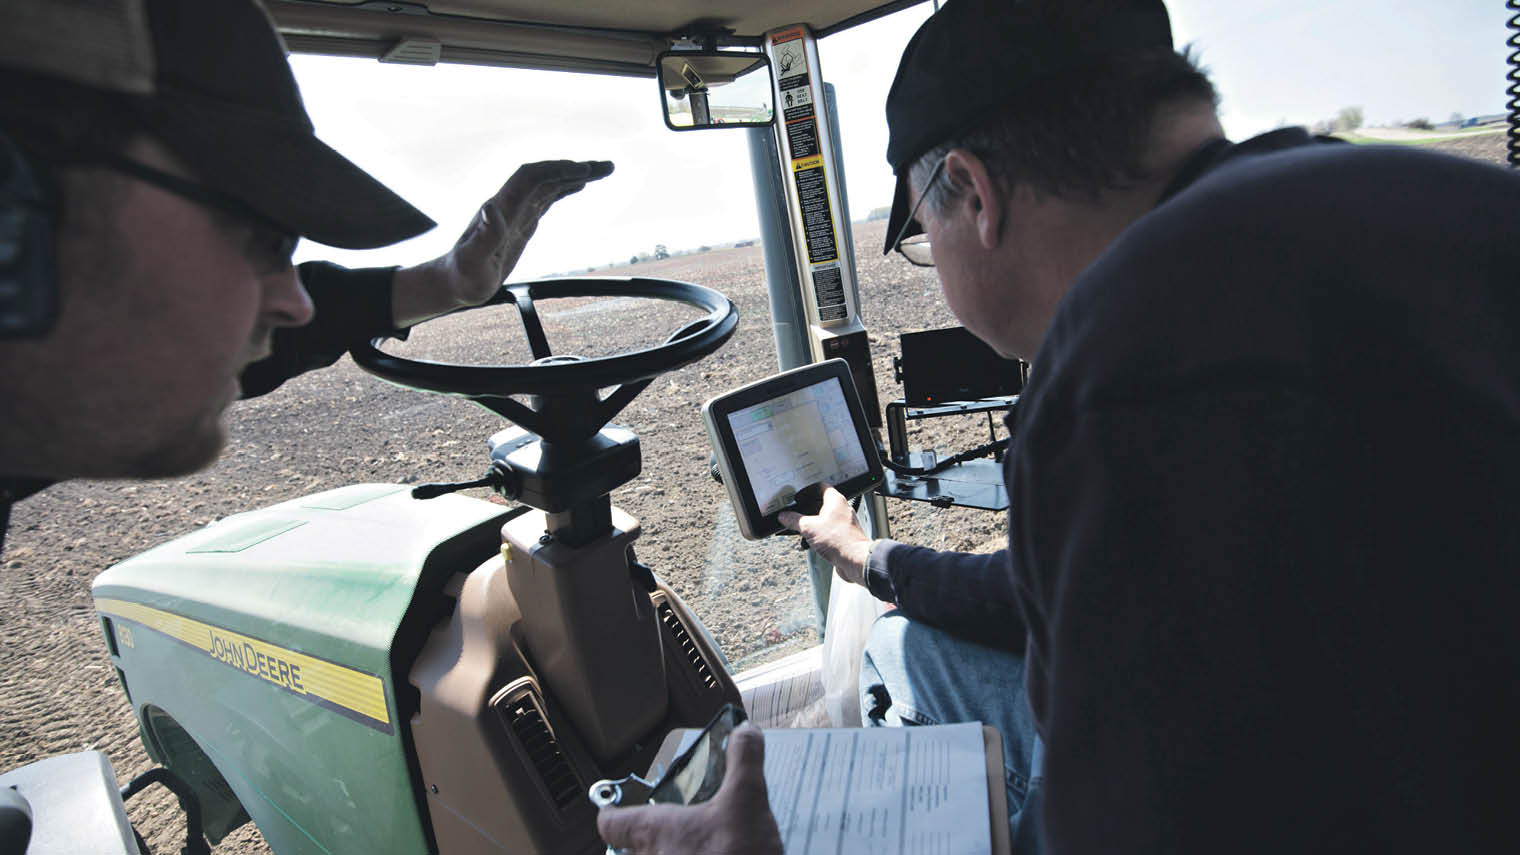 Farmers using tablet in tractor